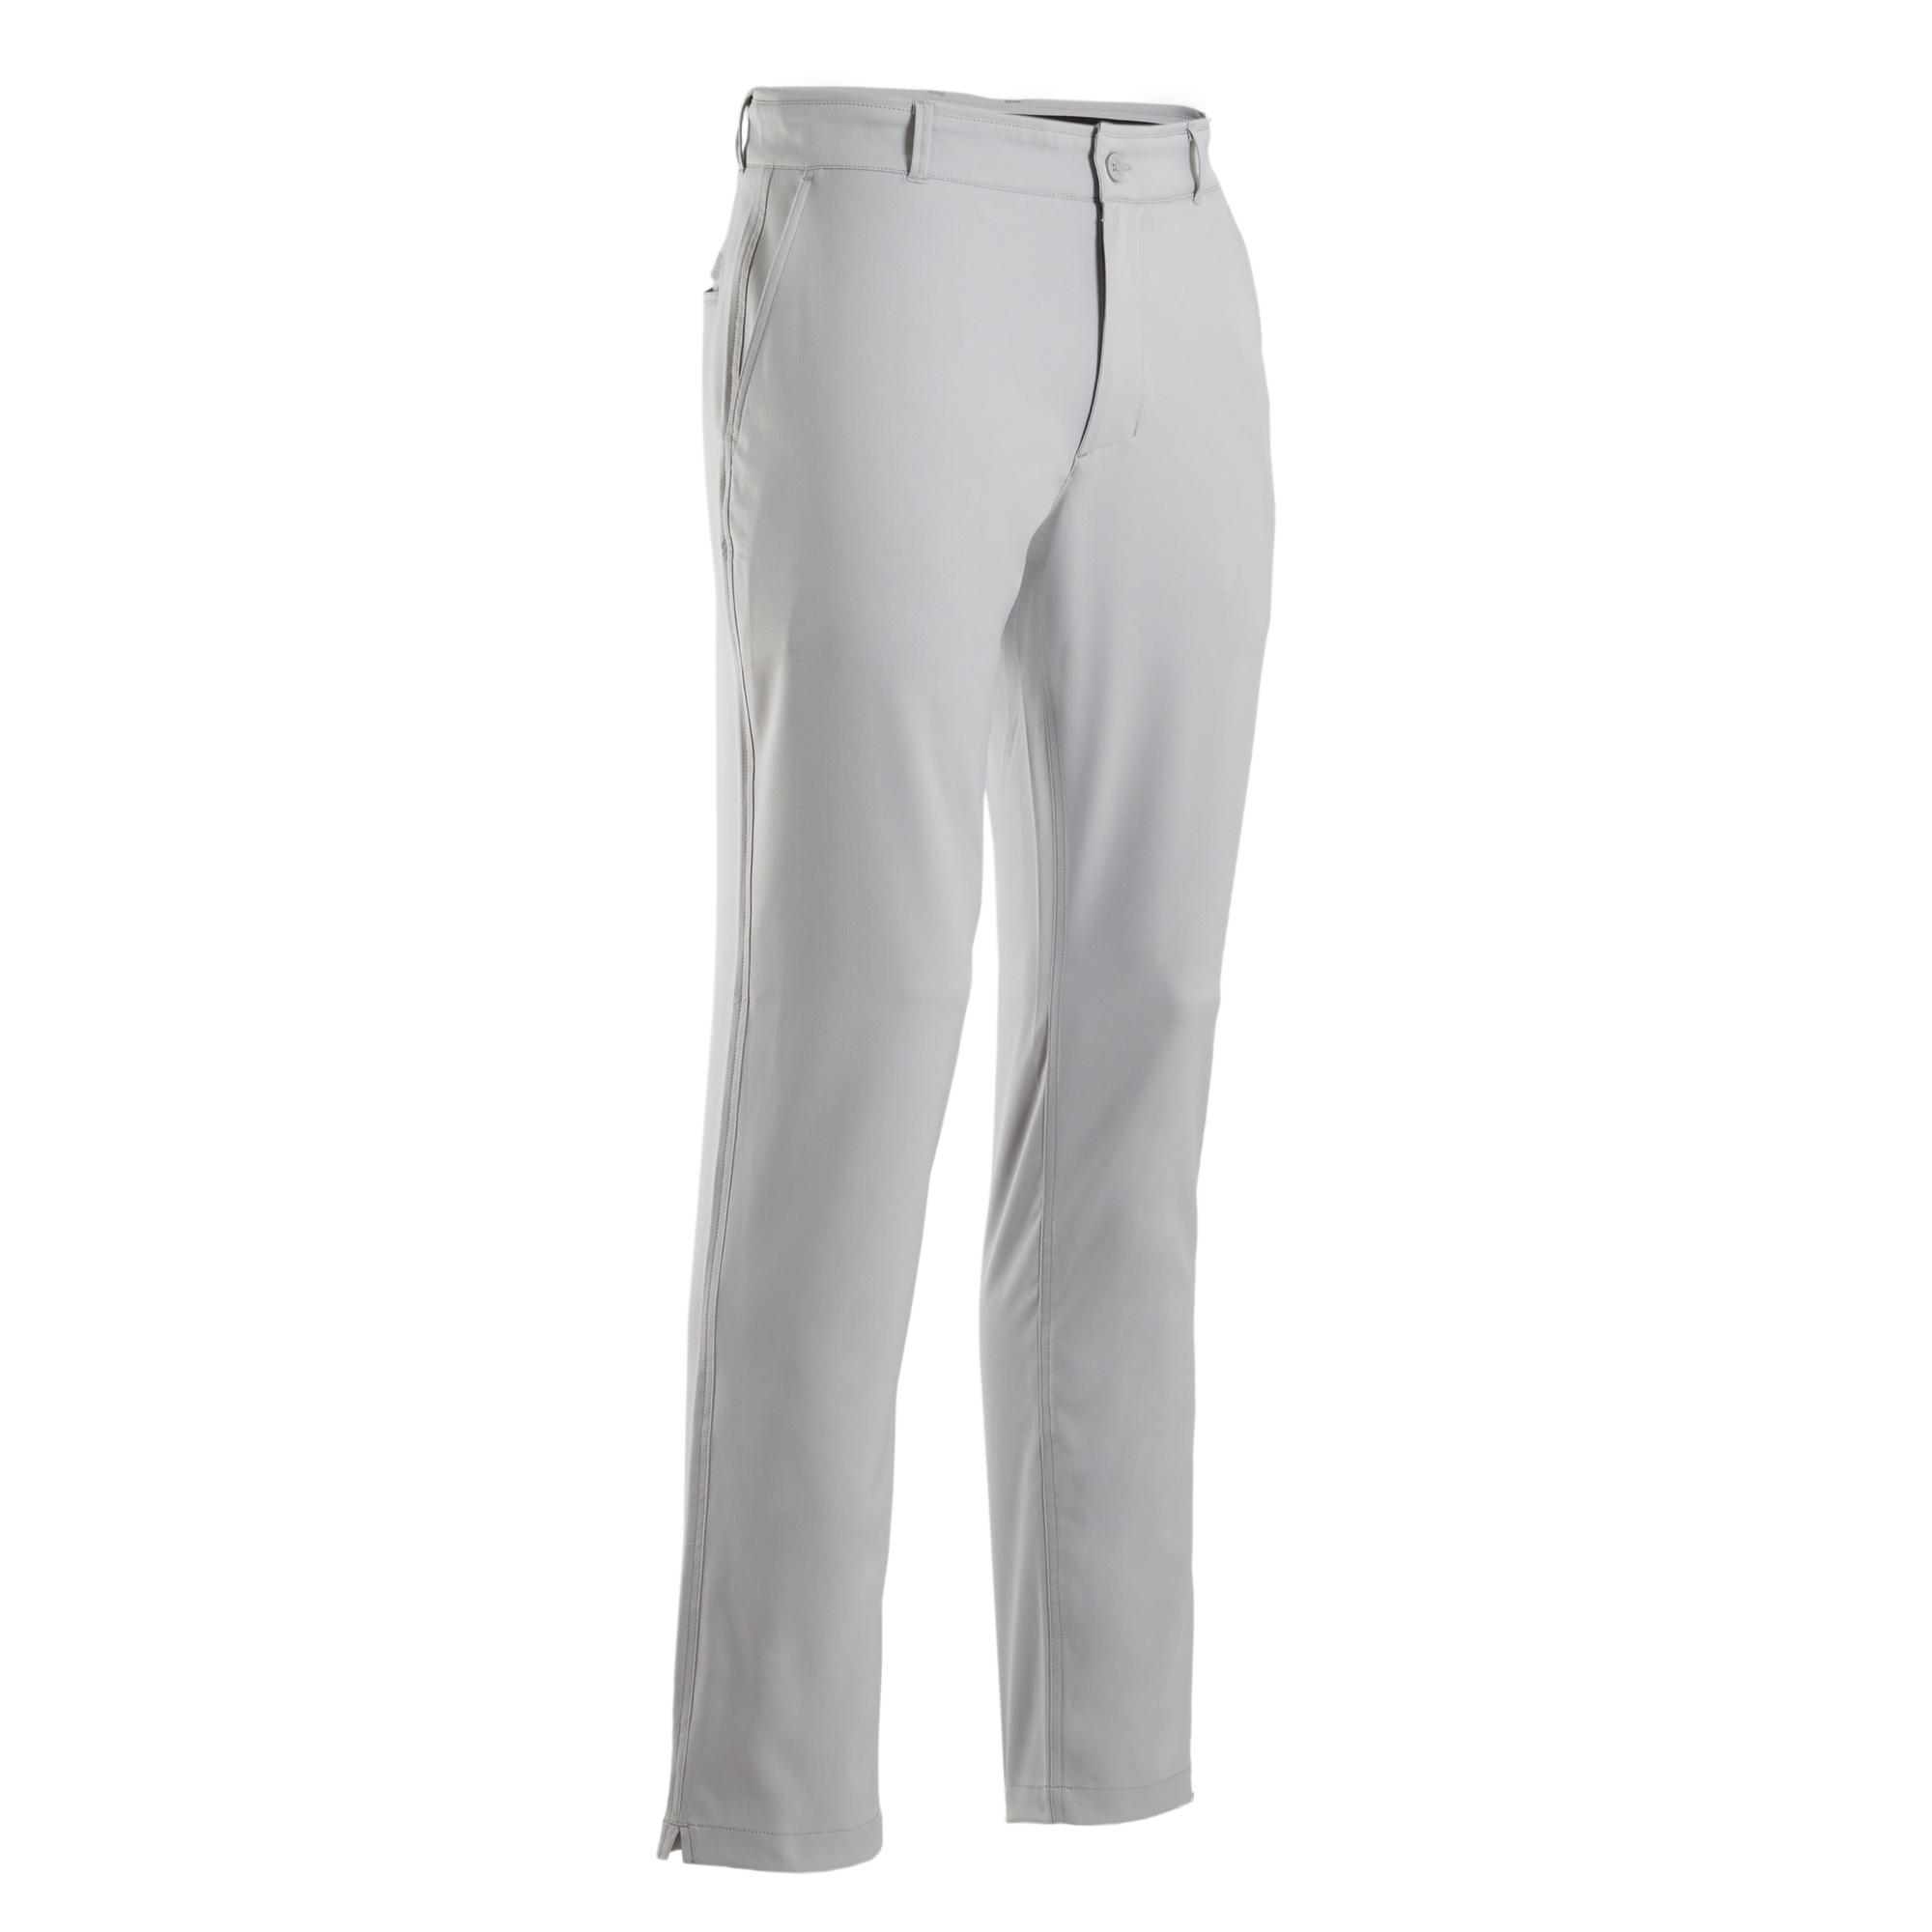 MEN'S BREATHABLE GOLF TROUSERS GREY 